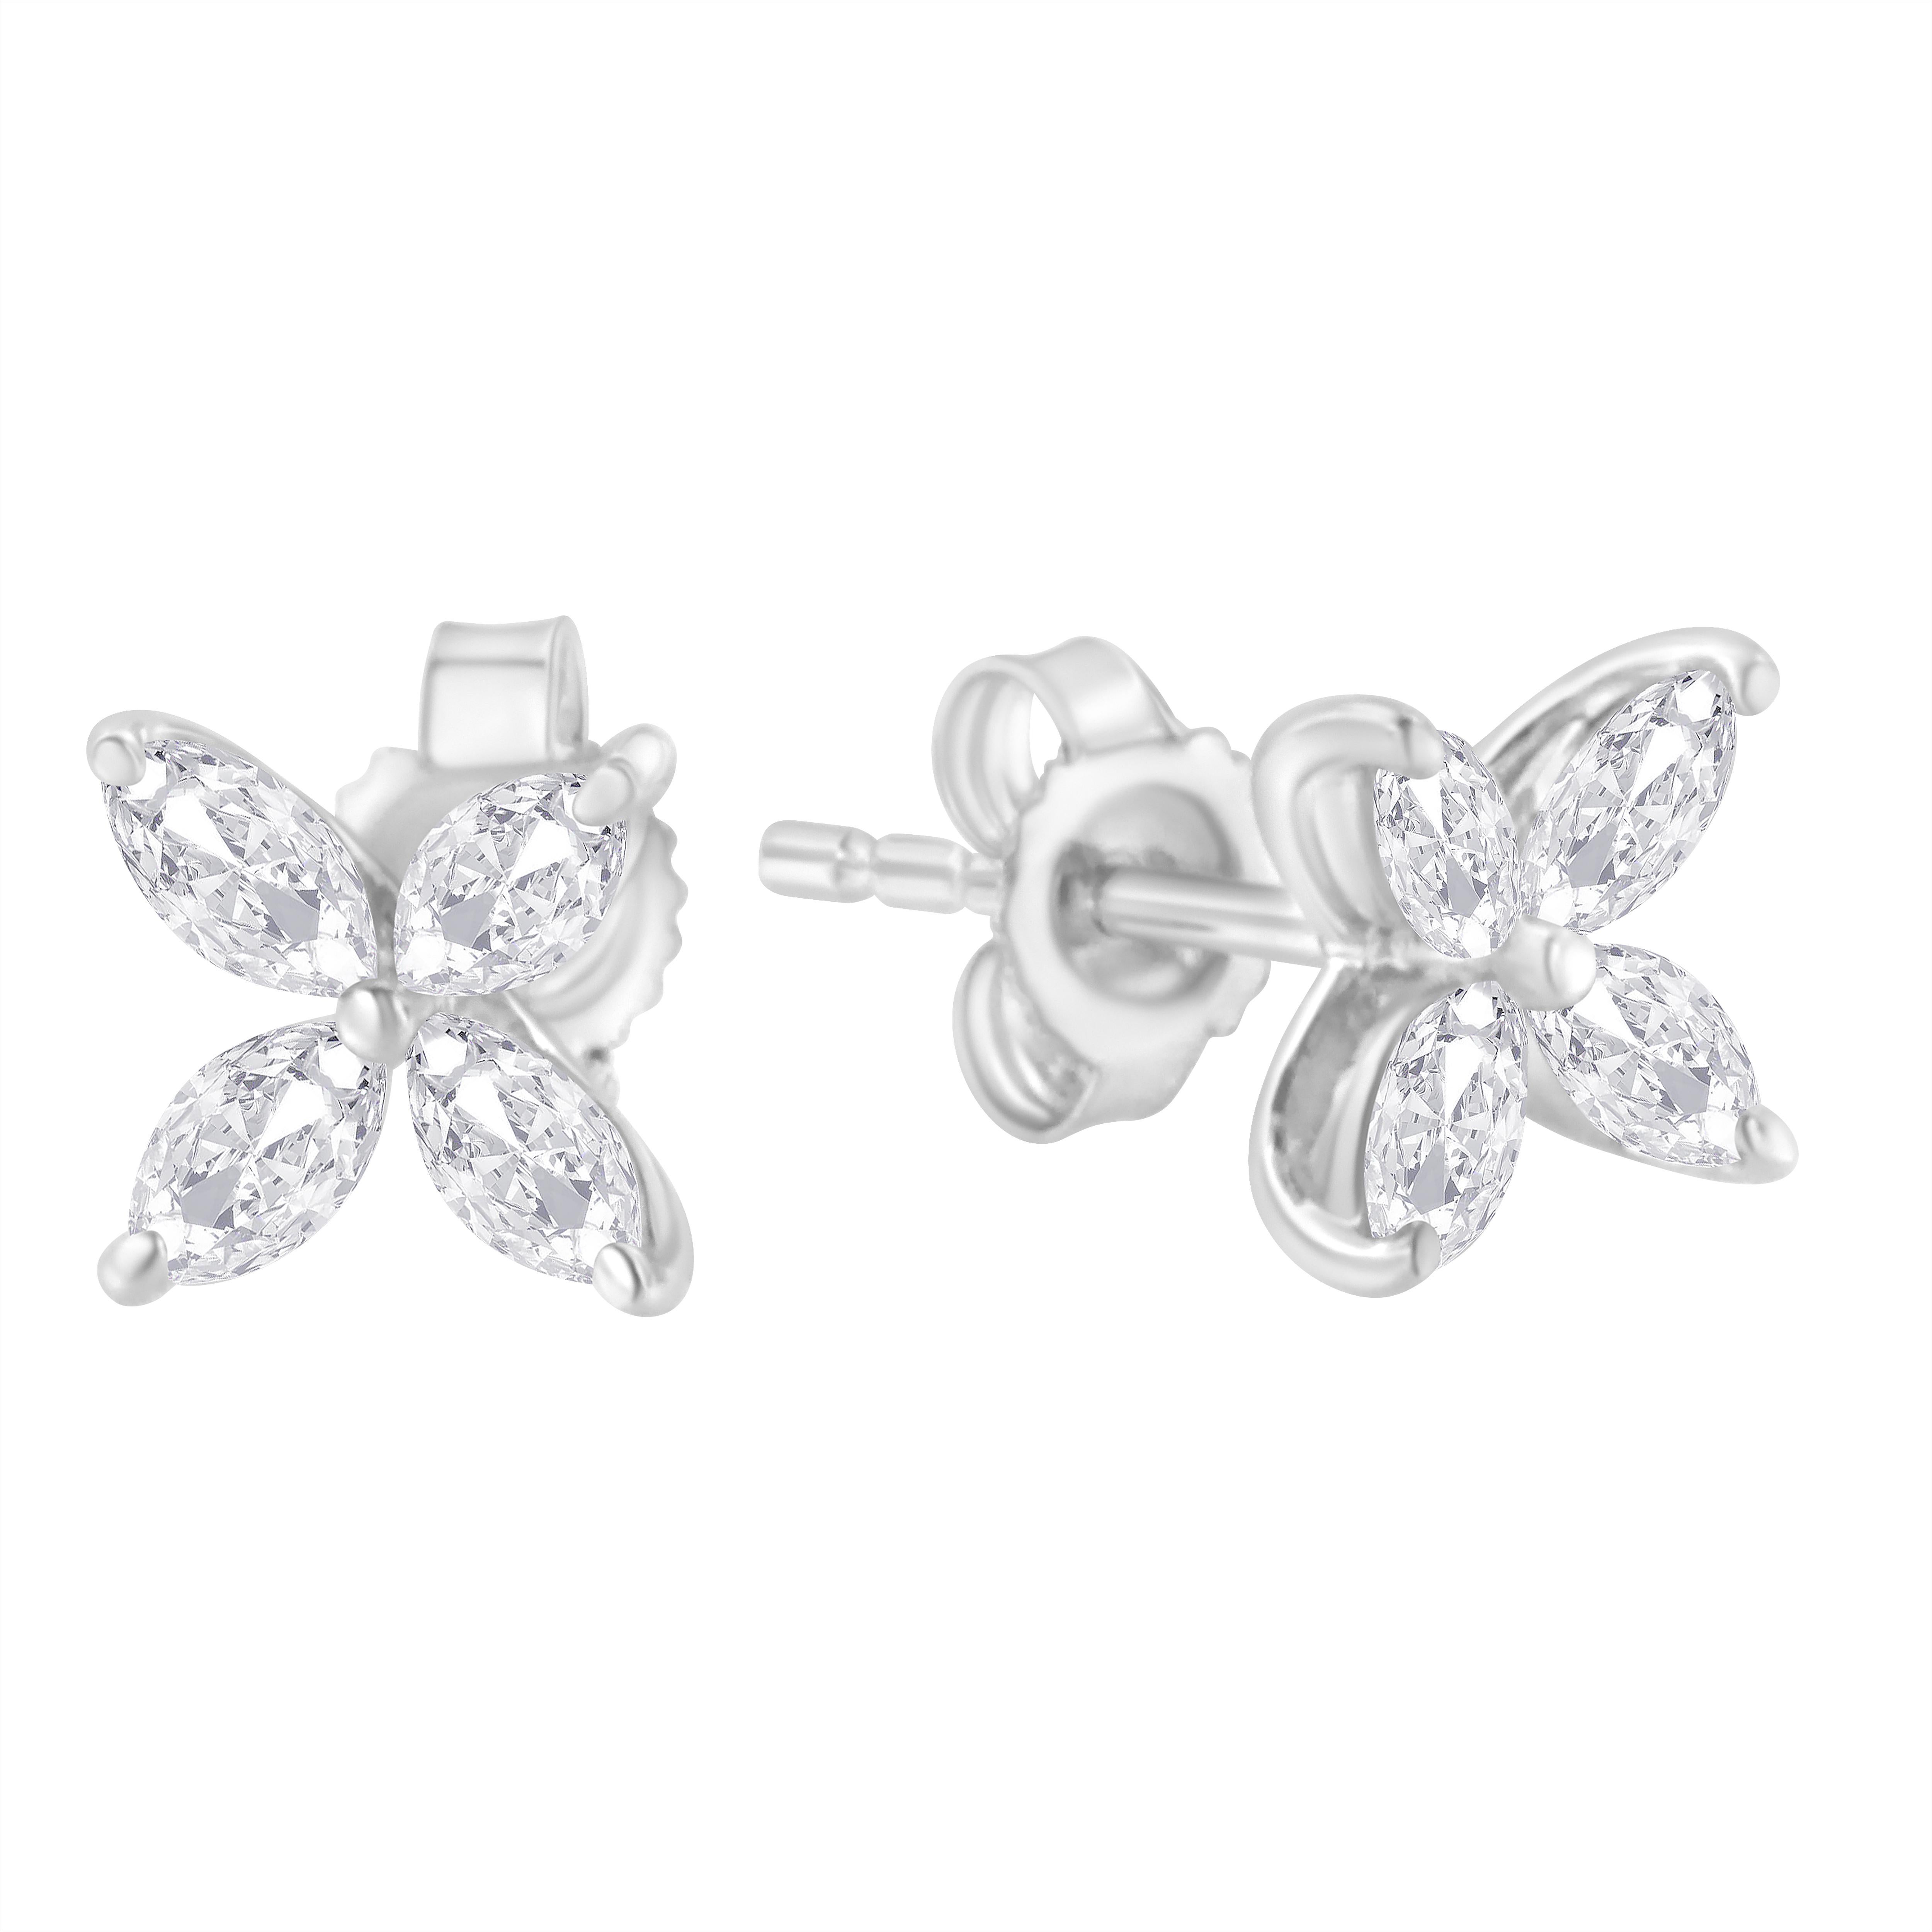 A pair of floral diamond earrings featuring four marquise shaped diamonds arranged to resemble a flower. These delicate earrings are crafted in 14 karat white gold, and have a total diamond weight of 1/2 carat. These diamonds are color rated as H-I